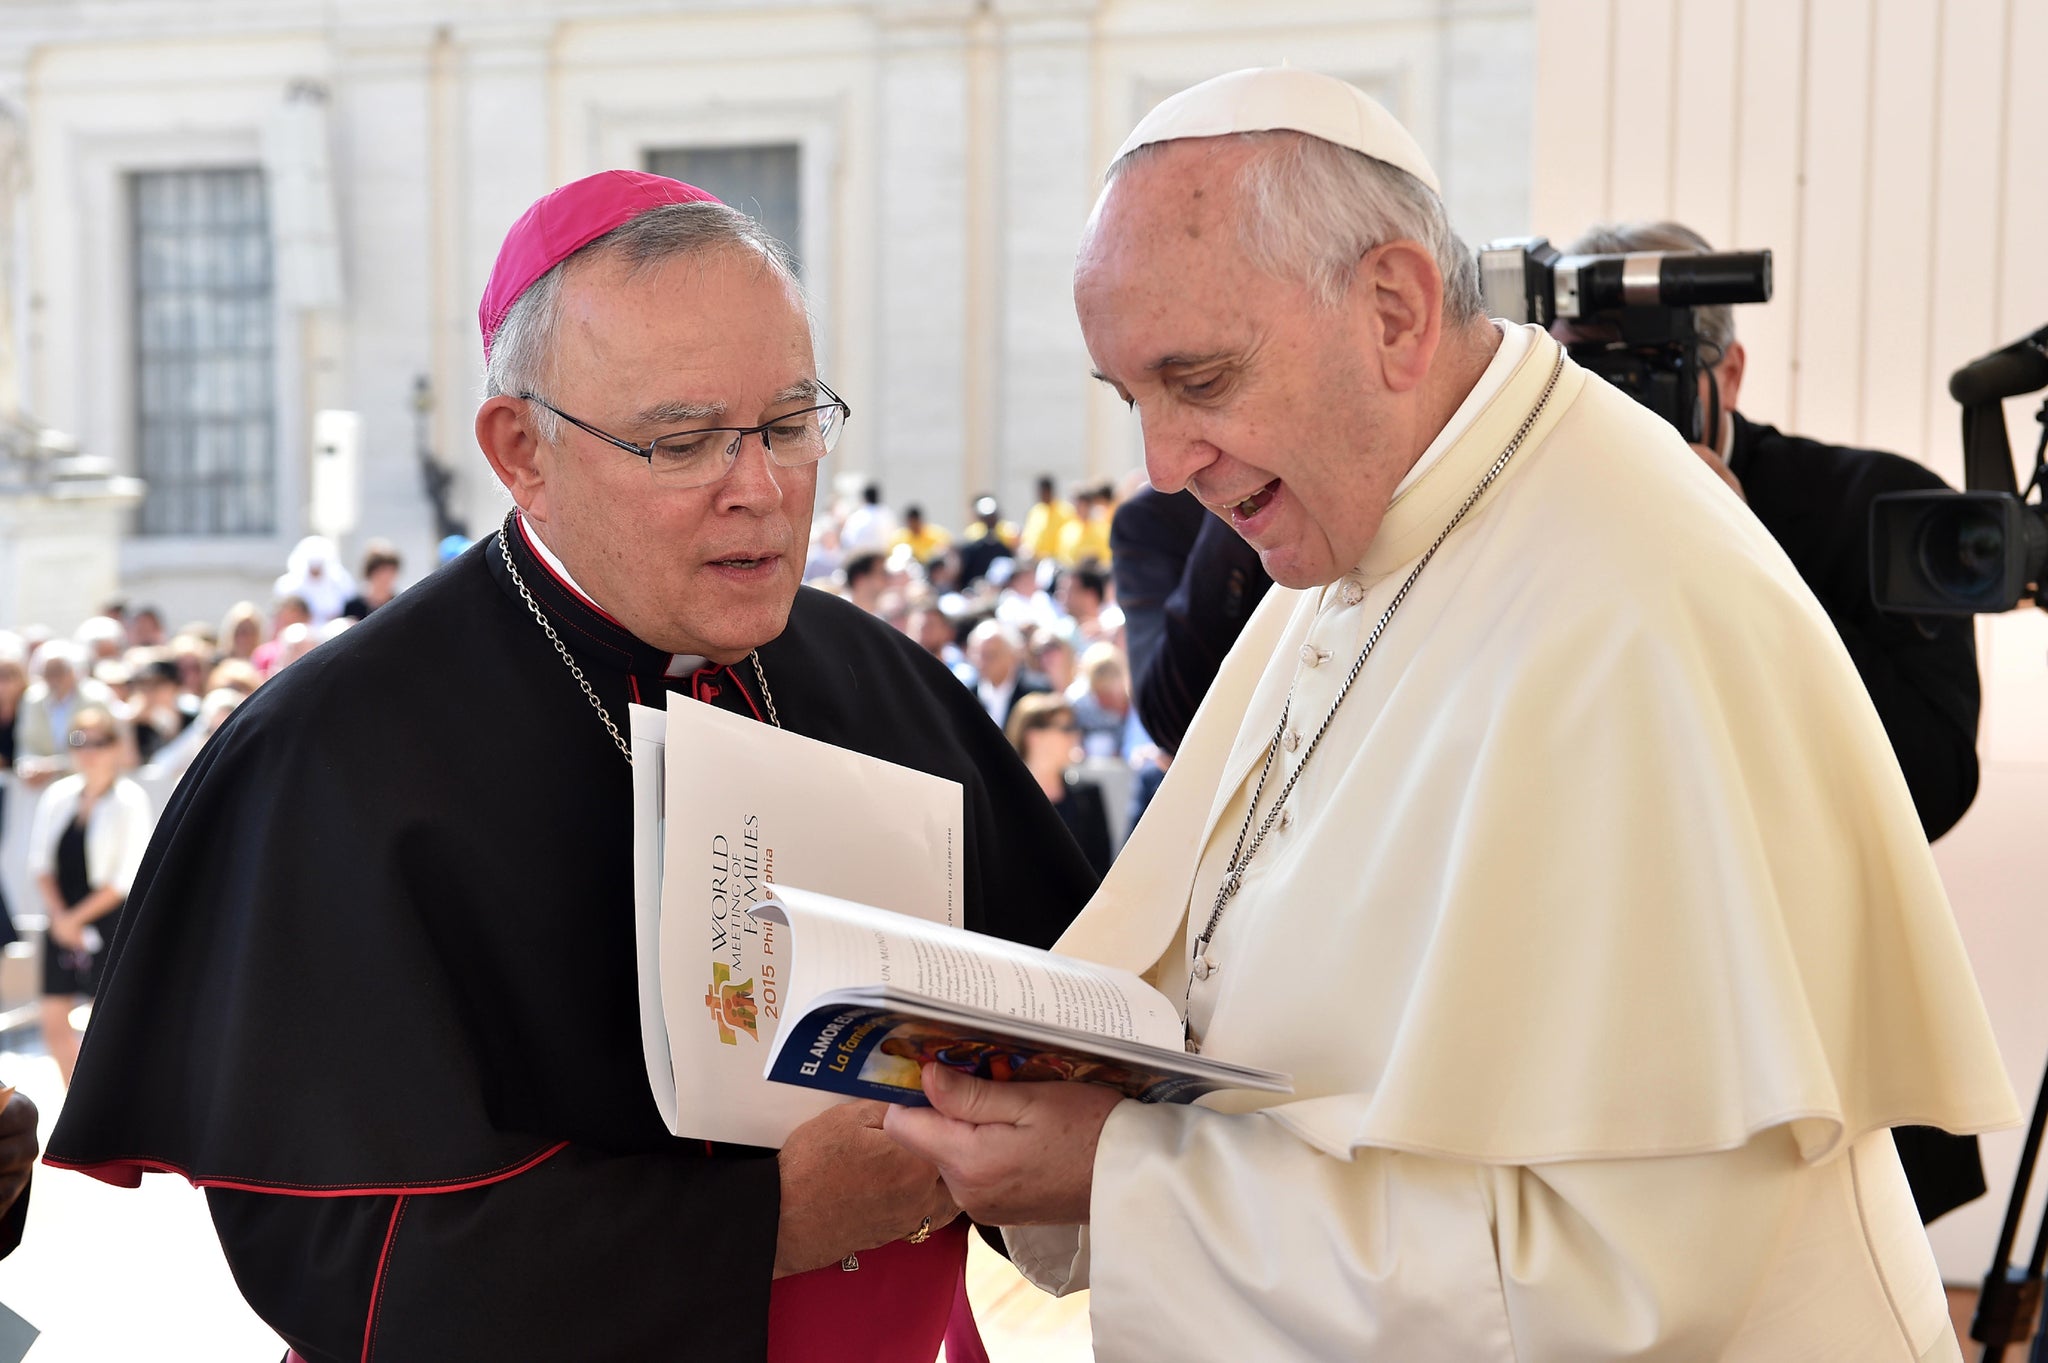 Pope Francis and Archbishop Chaput at an audience in Saint Peter’s Square. -- L’Osservatore Romano Photographic Service